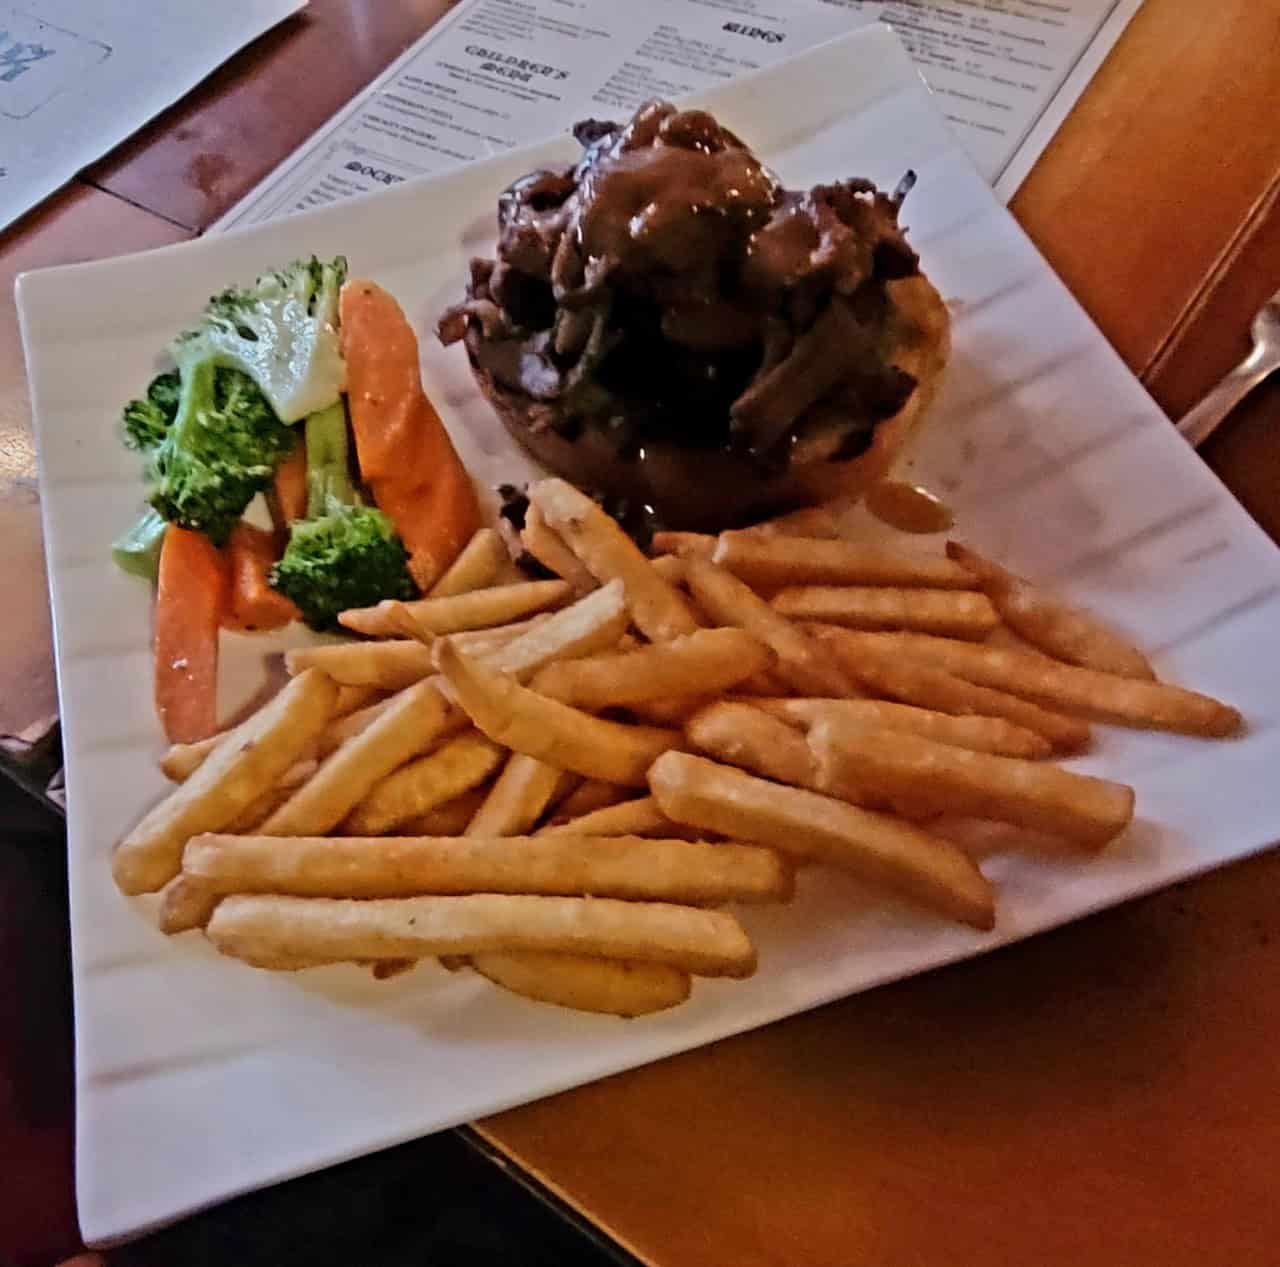 Great Fries & More at Hopkins Dining Parlour - Moose Jaw Saskatchewan - You will find not only great fries at Hopkins Dining Parlour but also Prime Rib, Chicken Wings, Seafood and much more! A unique restaurant in Moose Jaw, Saskatchewan Canada